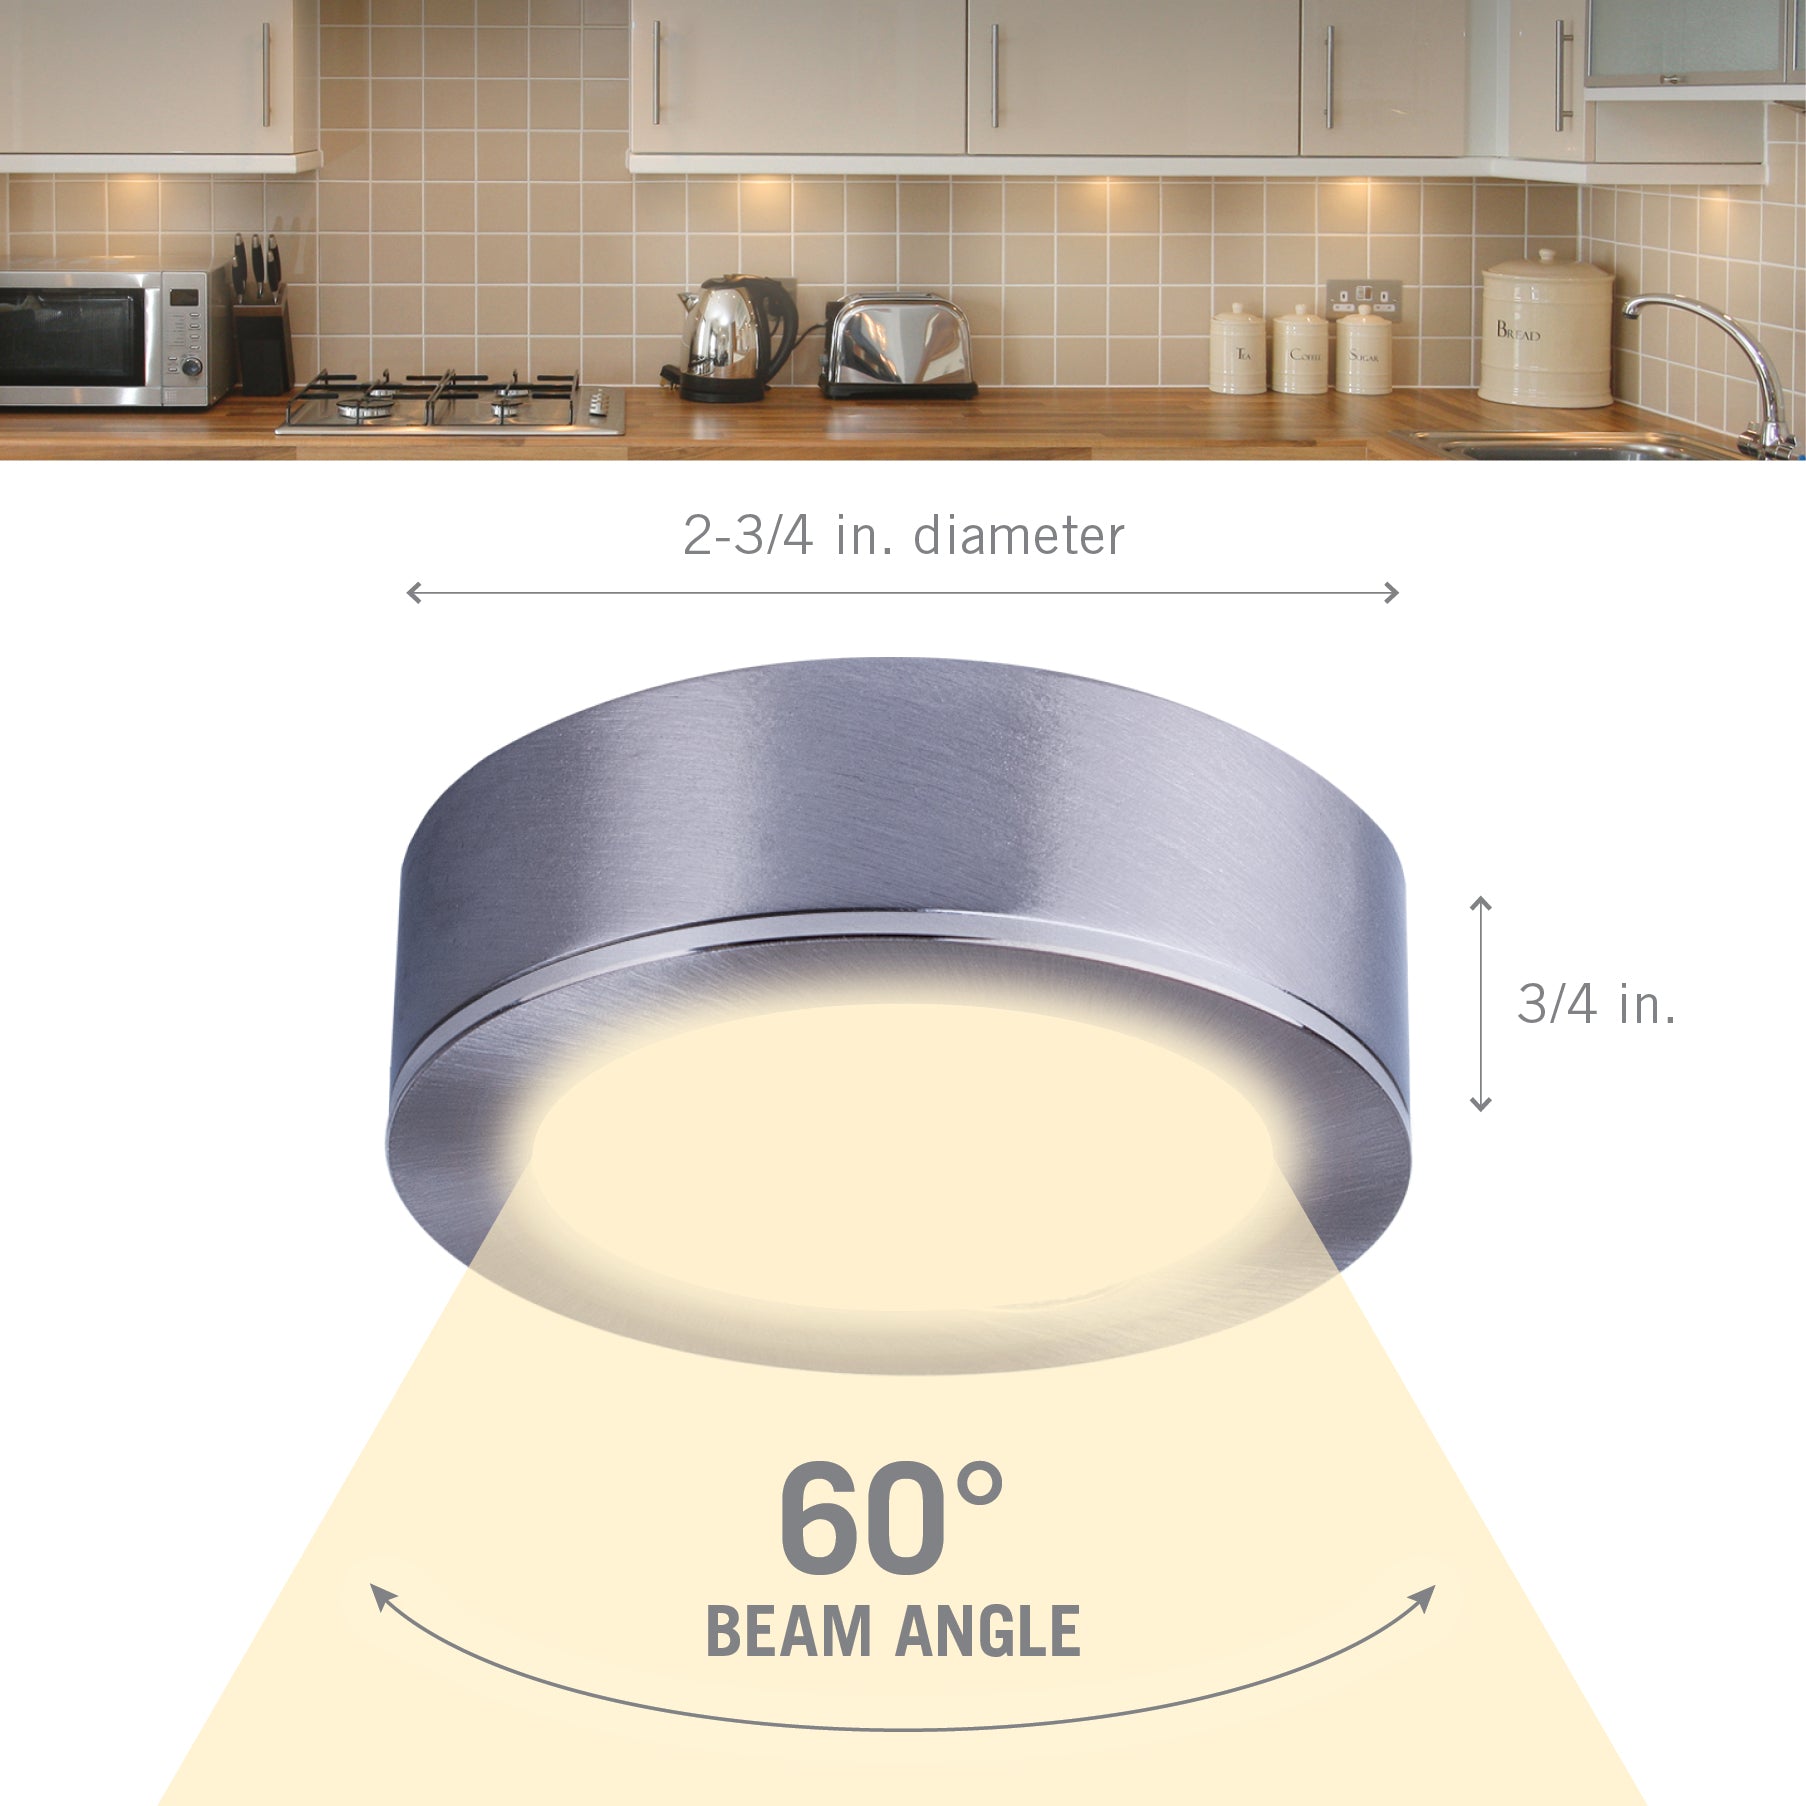 Dimensions of TriVue Dimmable Under Cabinet LED Puck Light Recessed Downlight